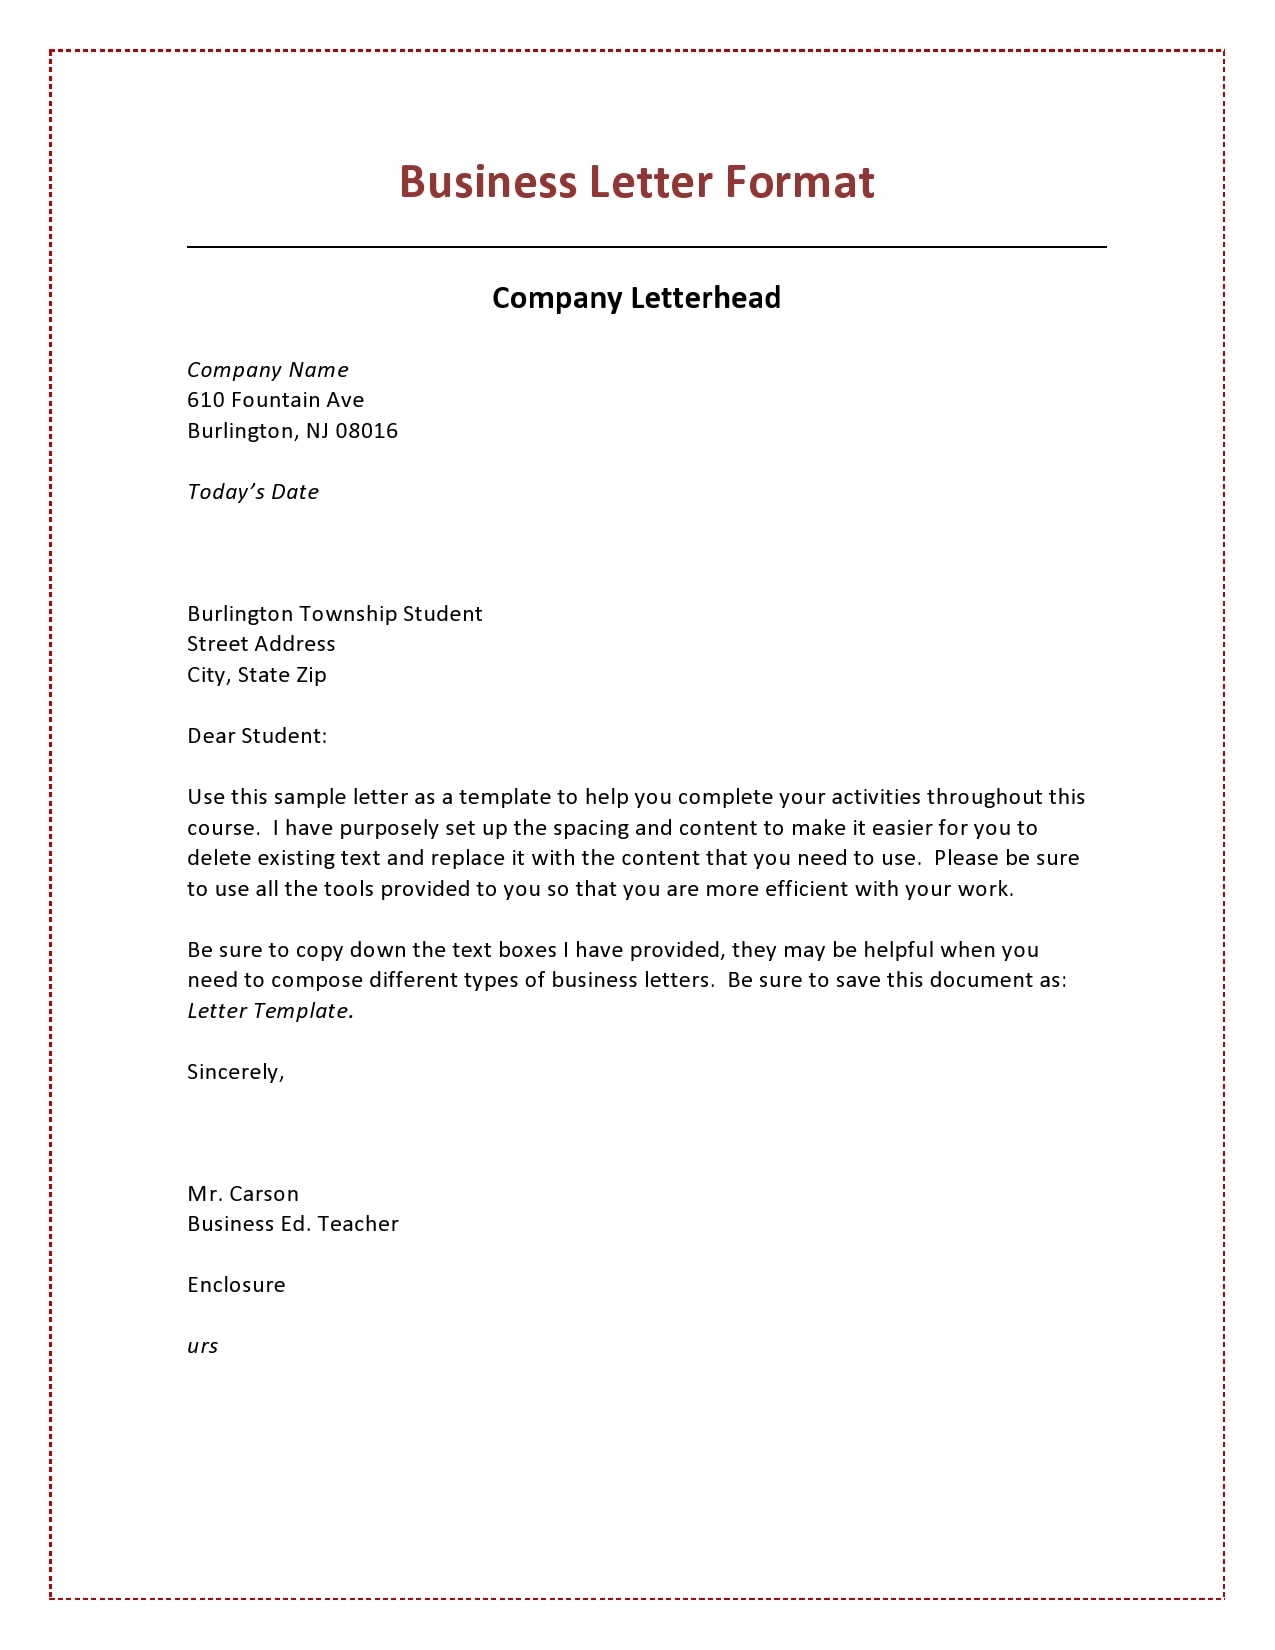 30 Professional Business Letter Templates Word 